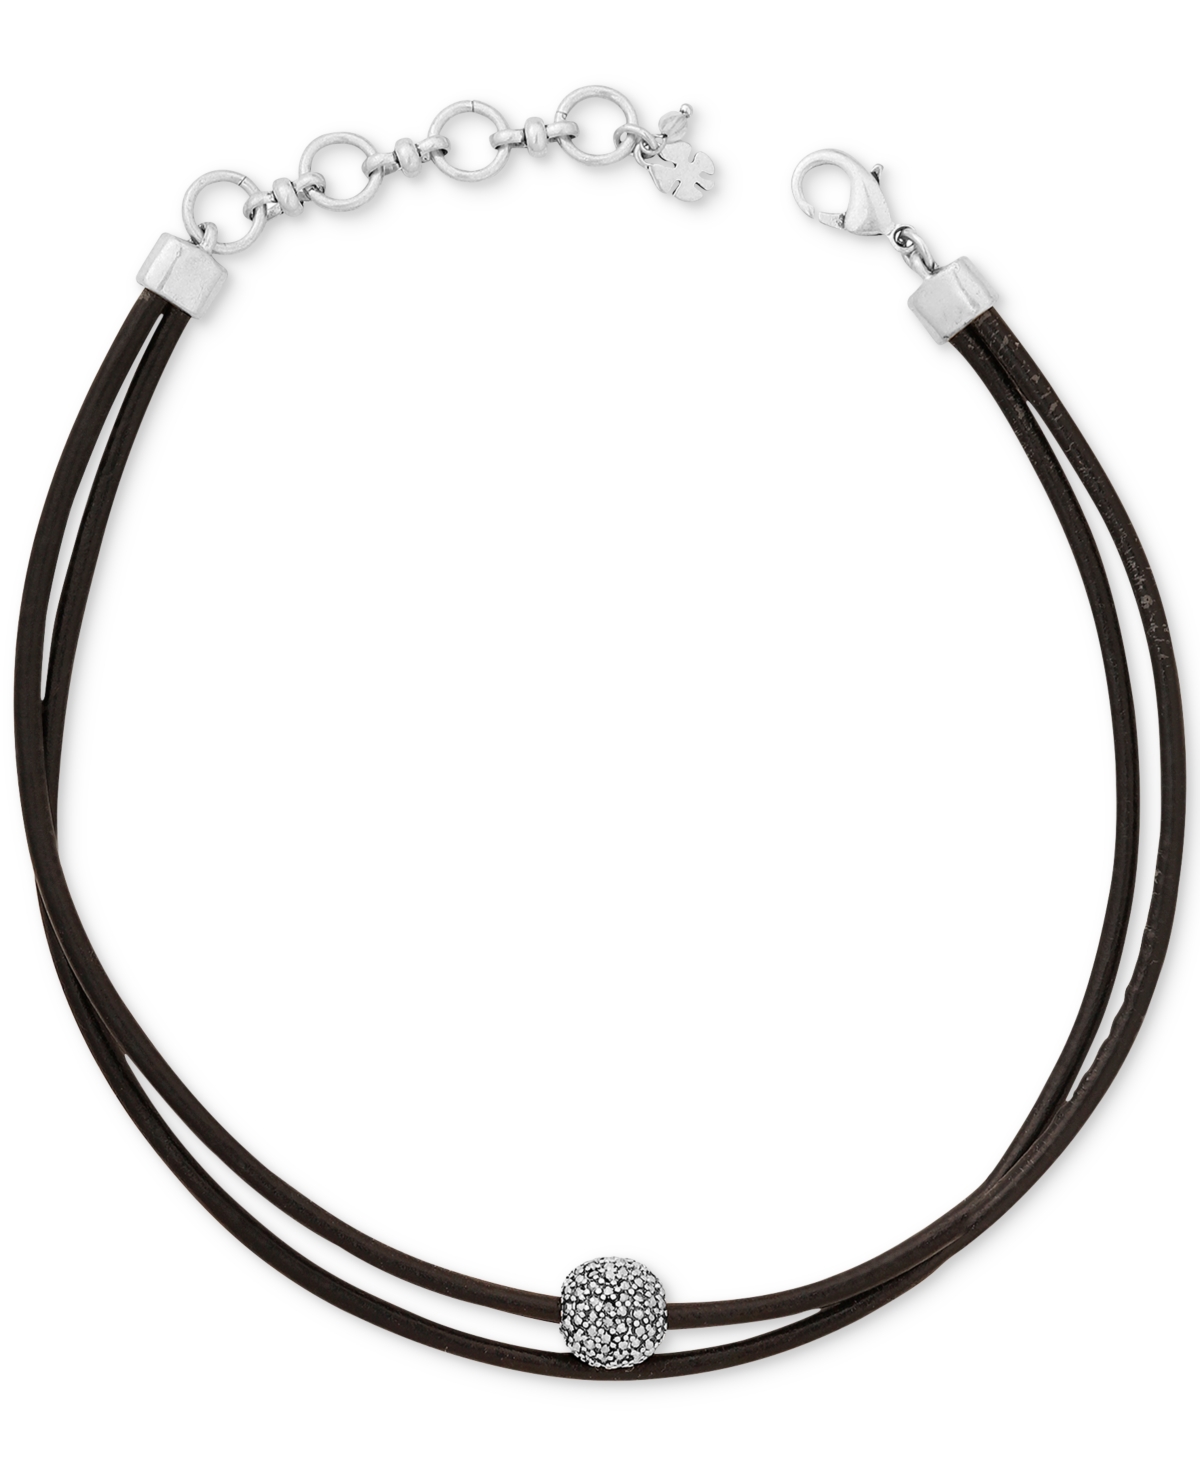 Silver-Tone Black Leather Crystal Choker Necklace - Silver